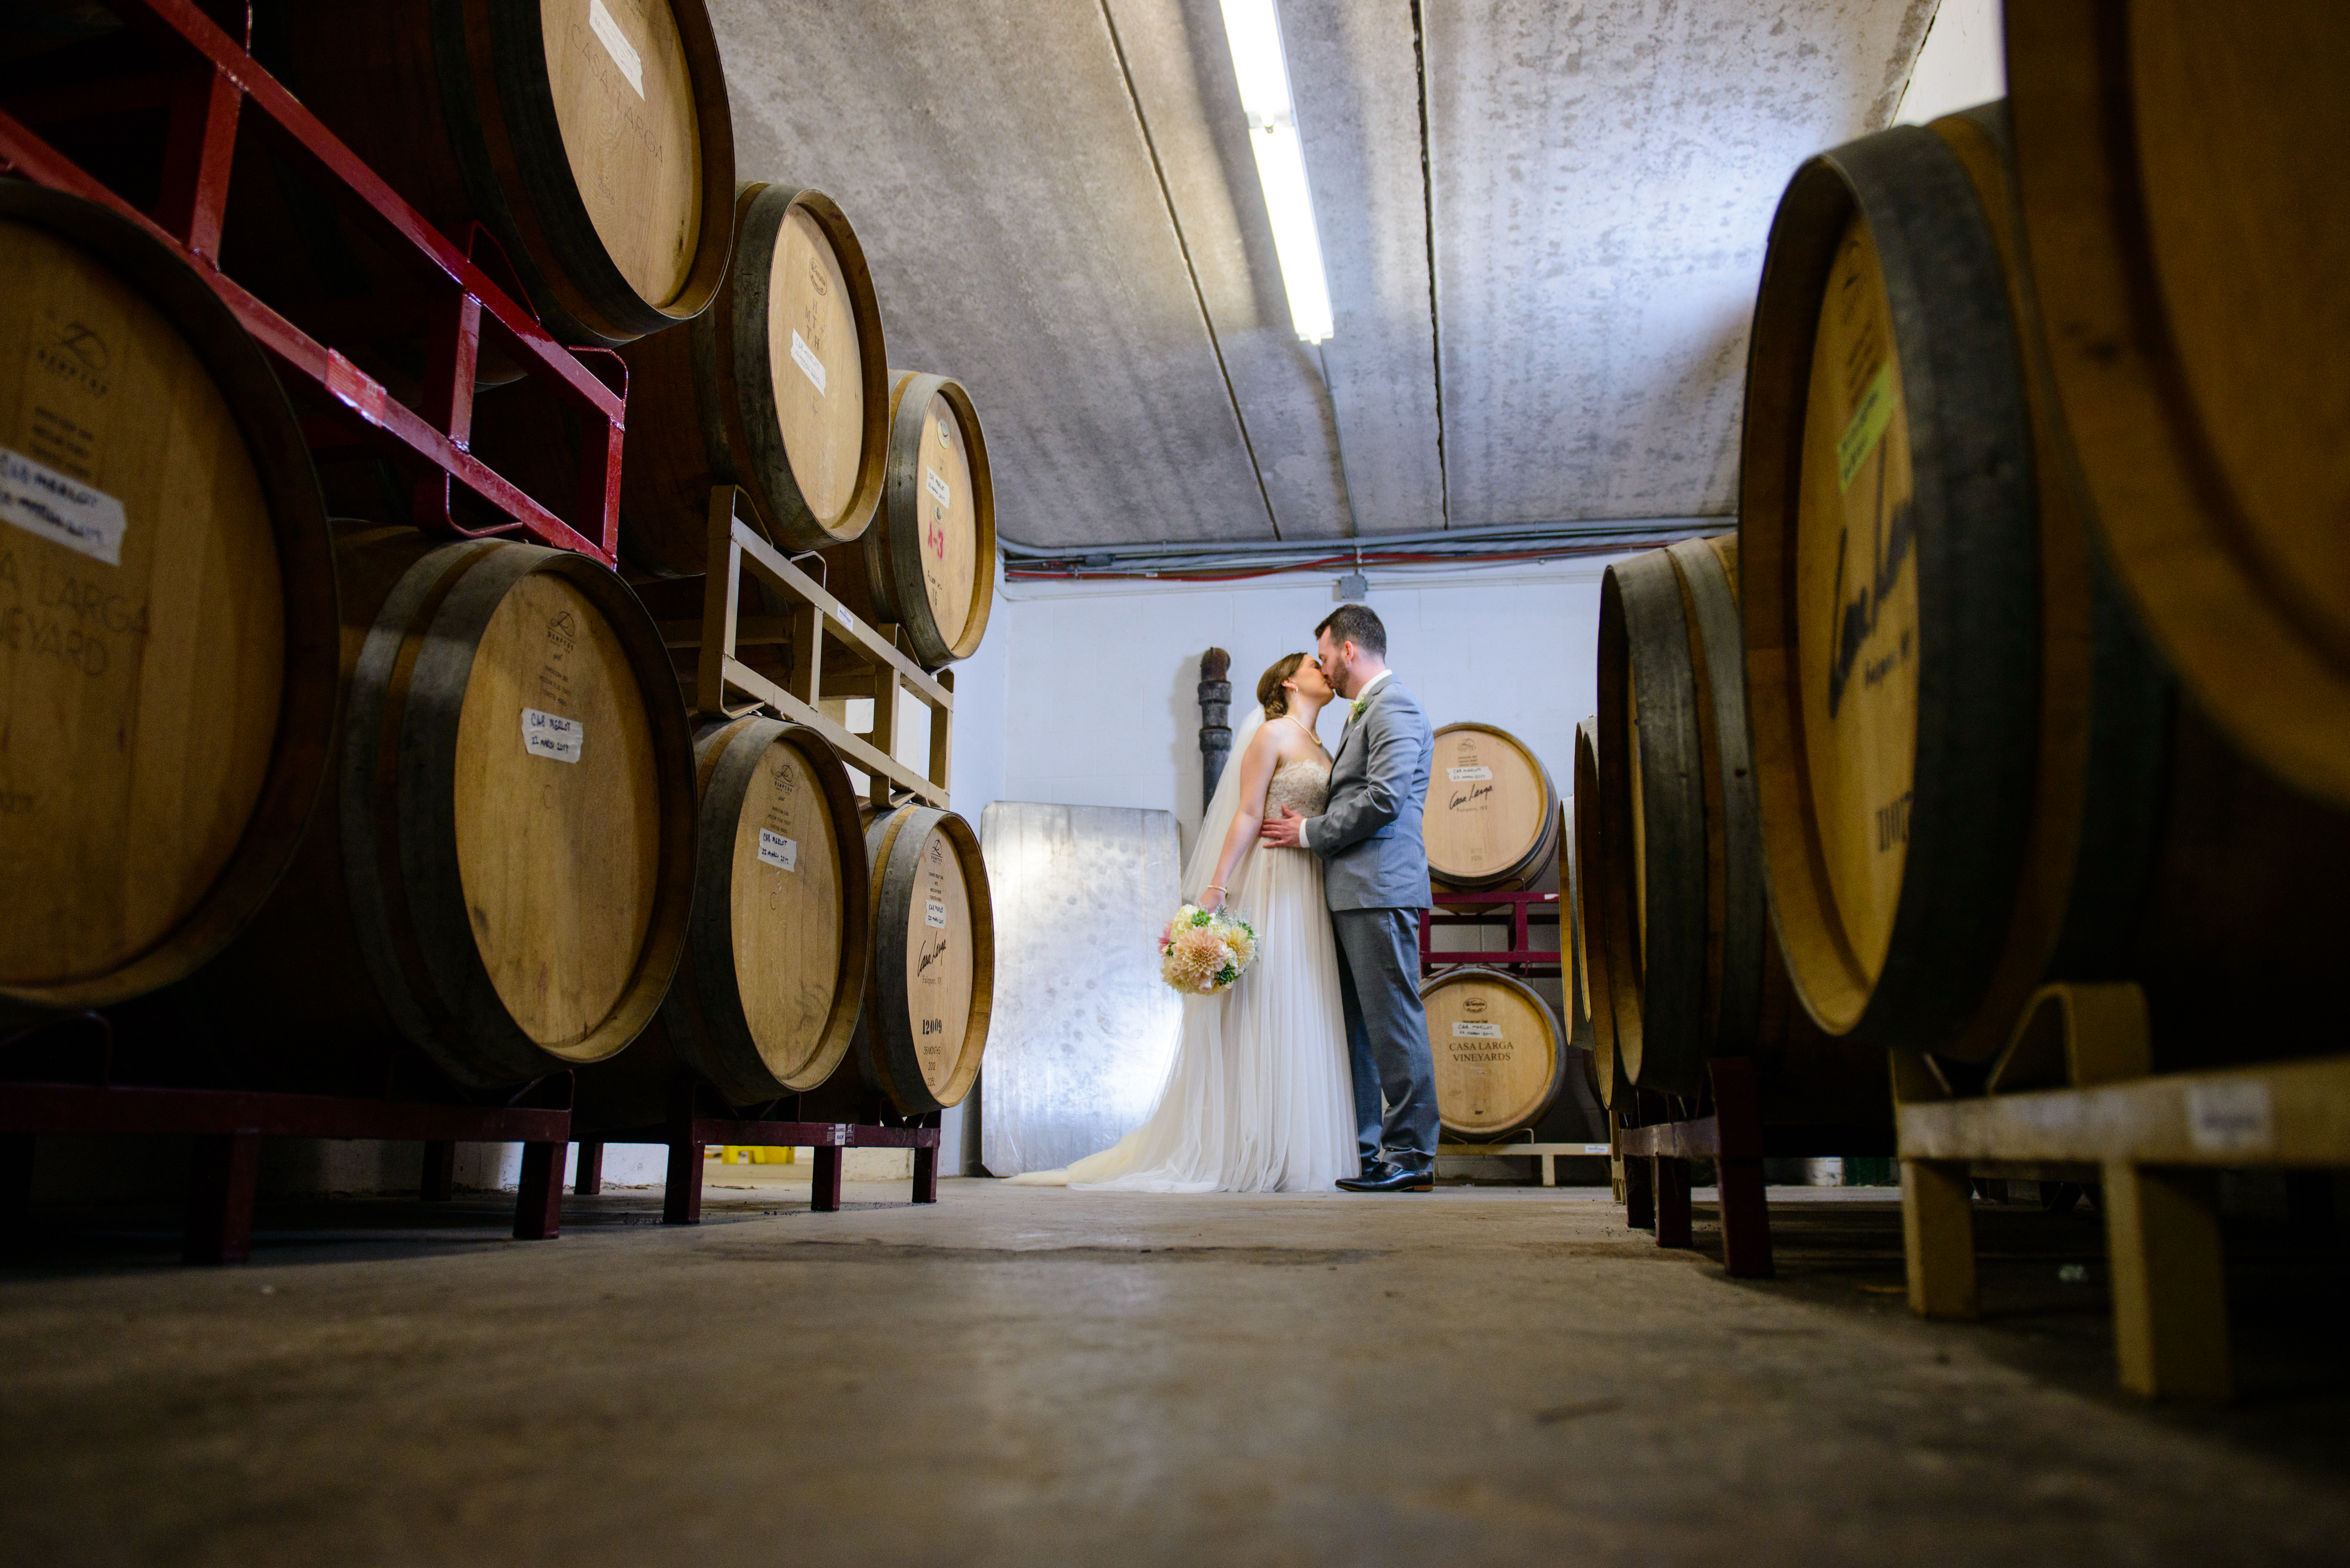 Couple in the Cellar, Wedding Ceremonies and Receptions at Casa Larga Vineyards